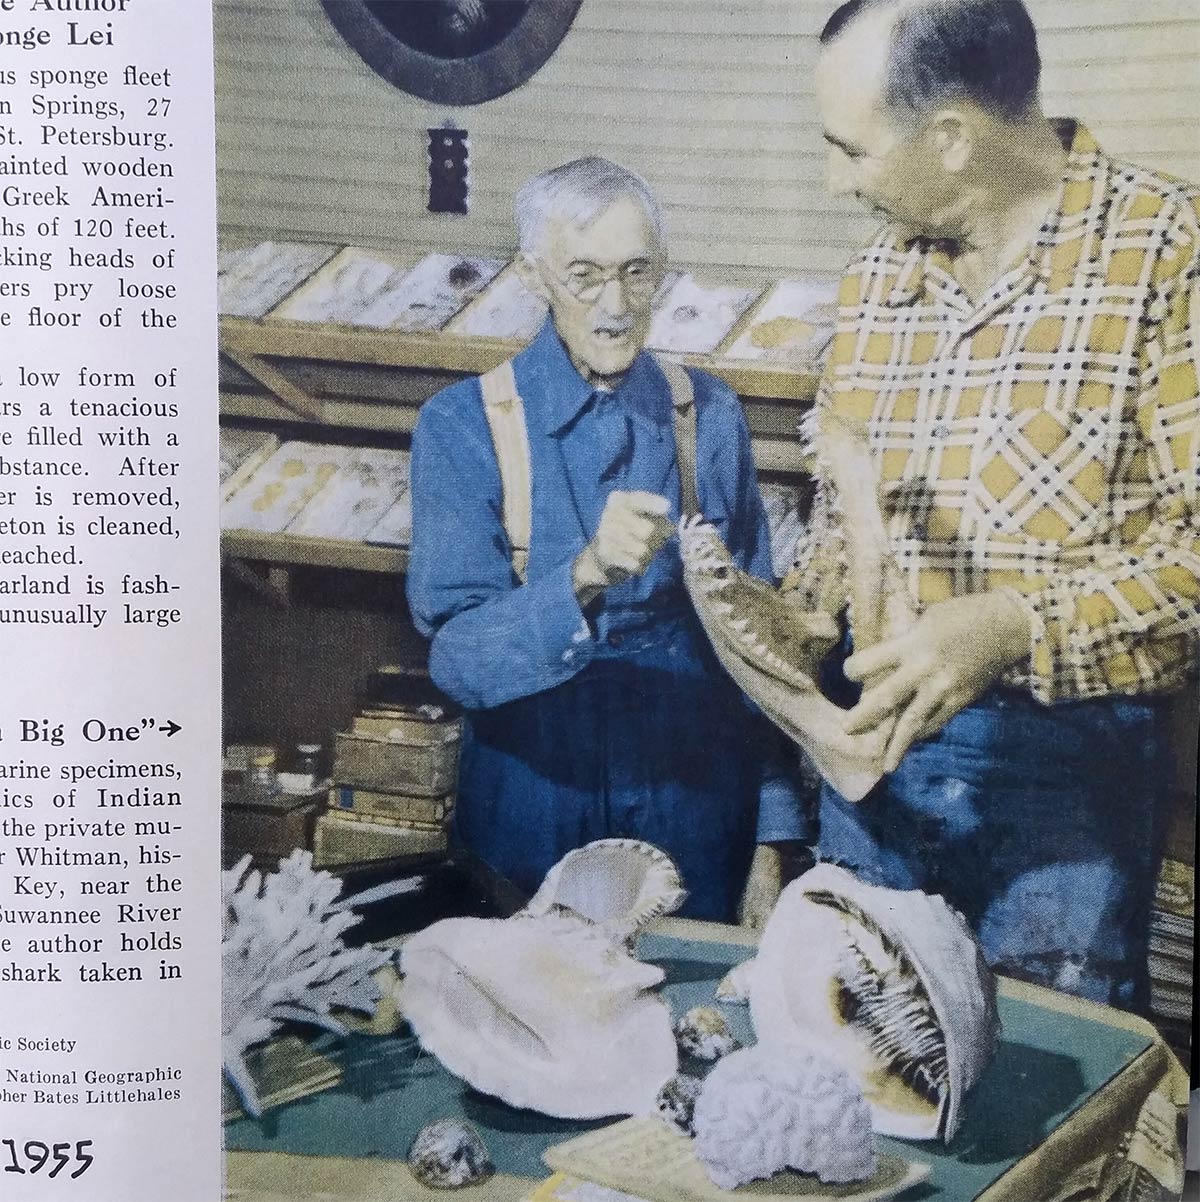 St Clair Whitman showing his collection featured in National Geographic